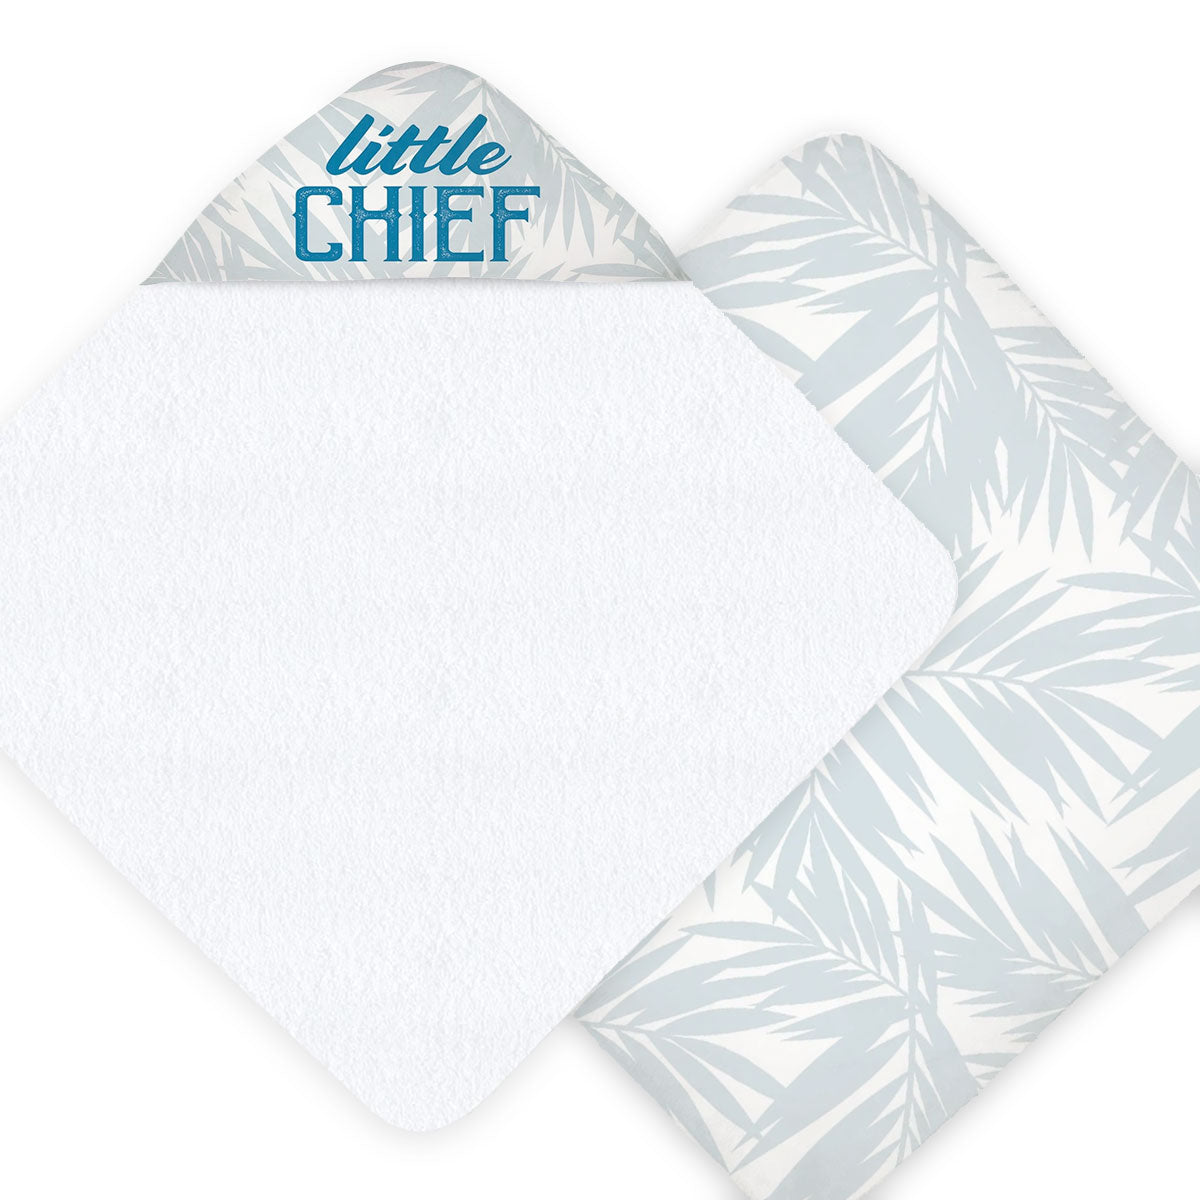 Little Chief Guam CNMI Hooded Baby Towel